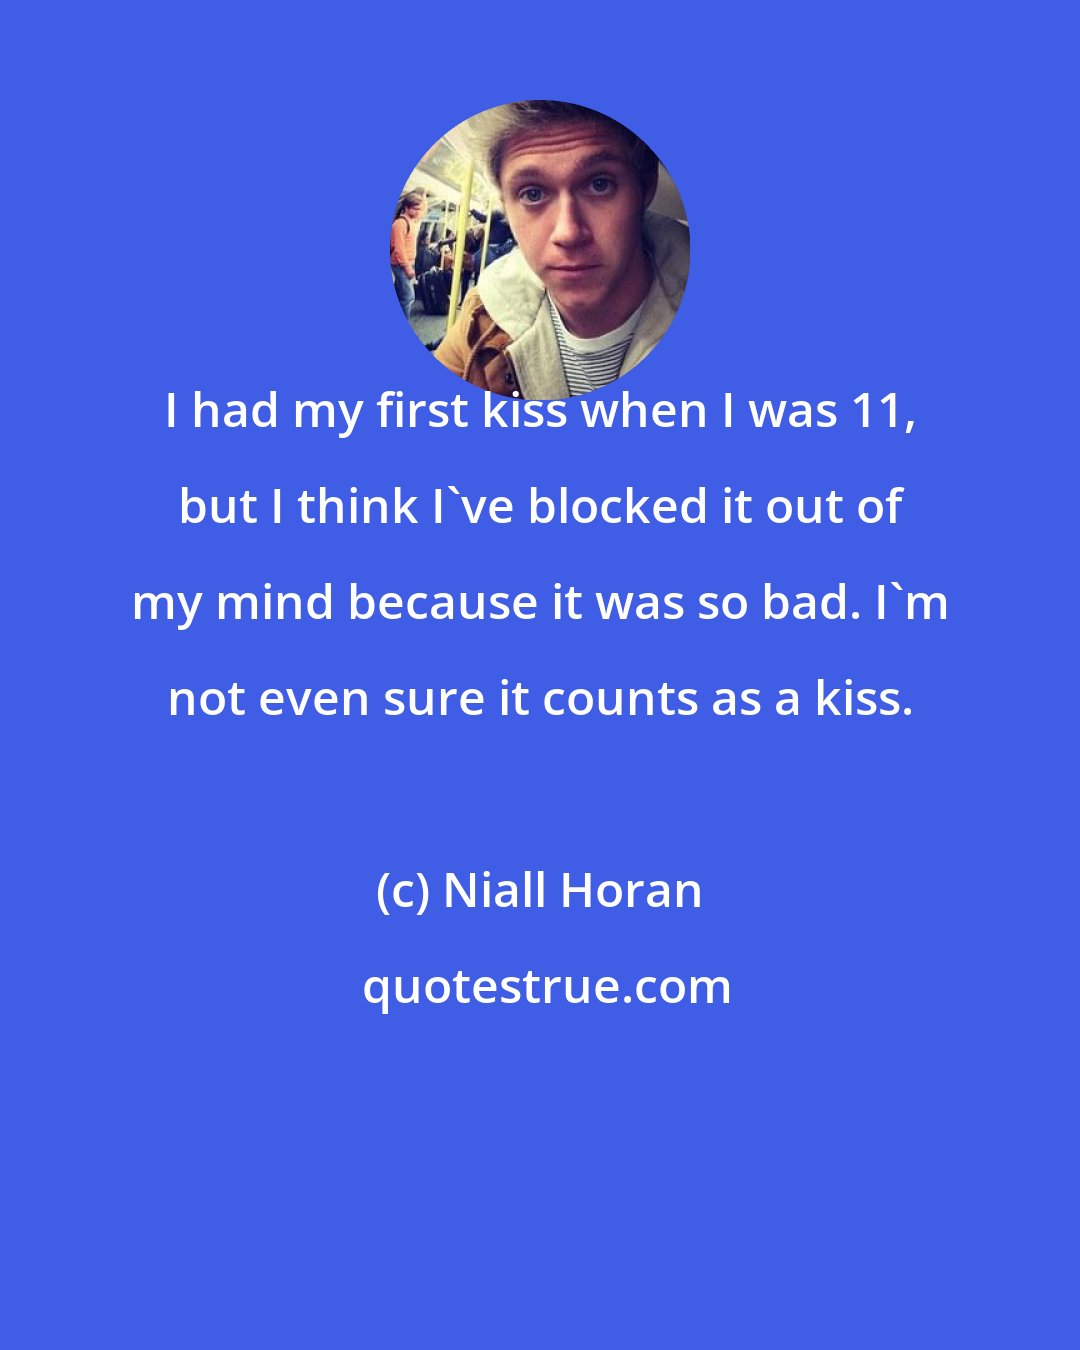 Niall Horan: I had my first kiss when I was 11, but I think I've blocked it out of my mind because it was so bad. I'm not even sure it counts as a kiss.